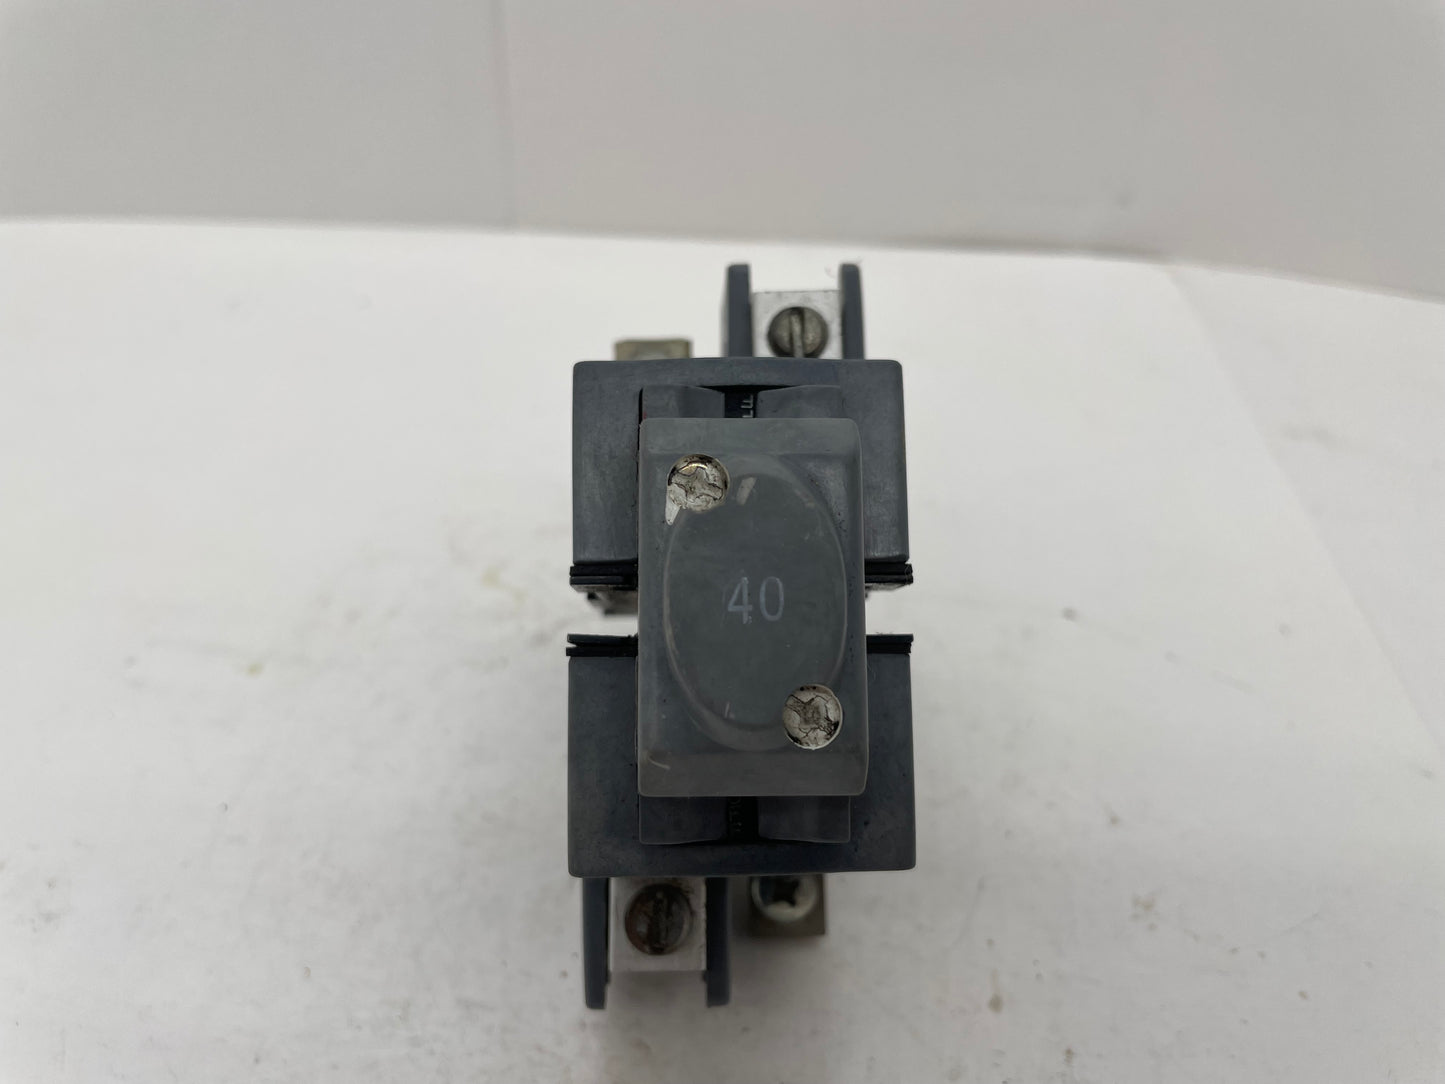 Connecticut Electric UBIP240 2P 40A Pushmatic Replacement Circuit Breaker - Reconditioned